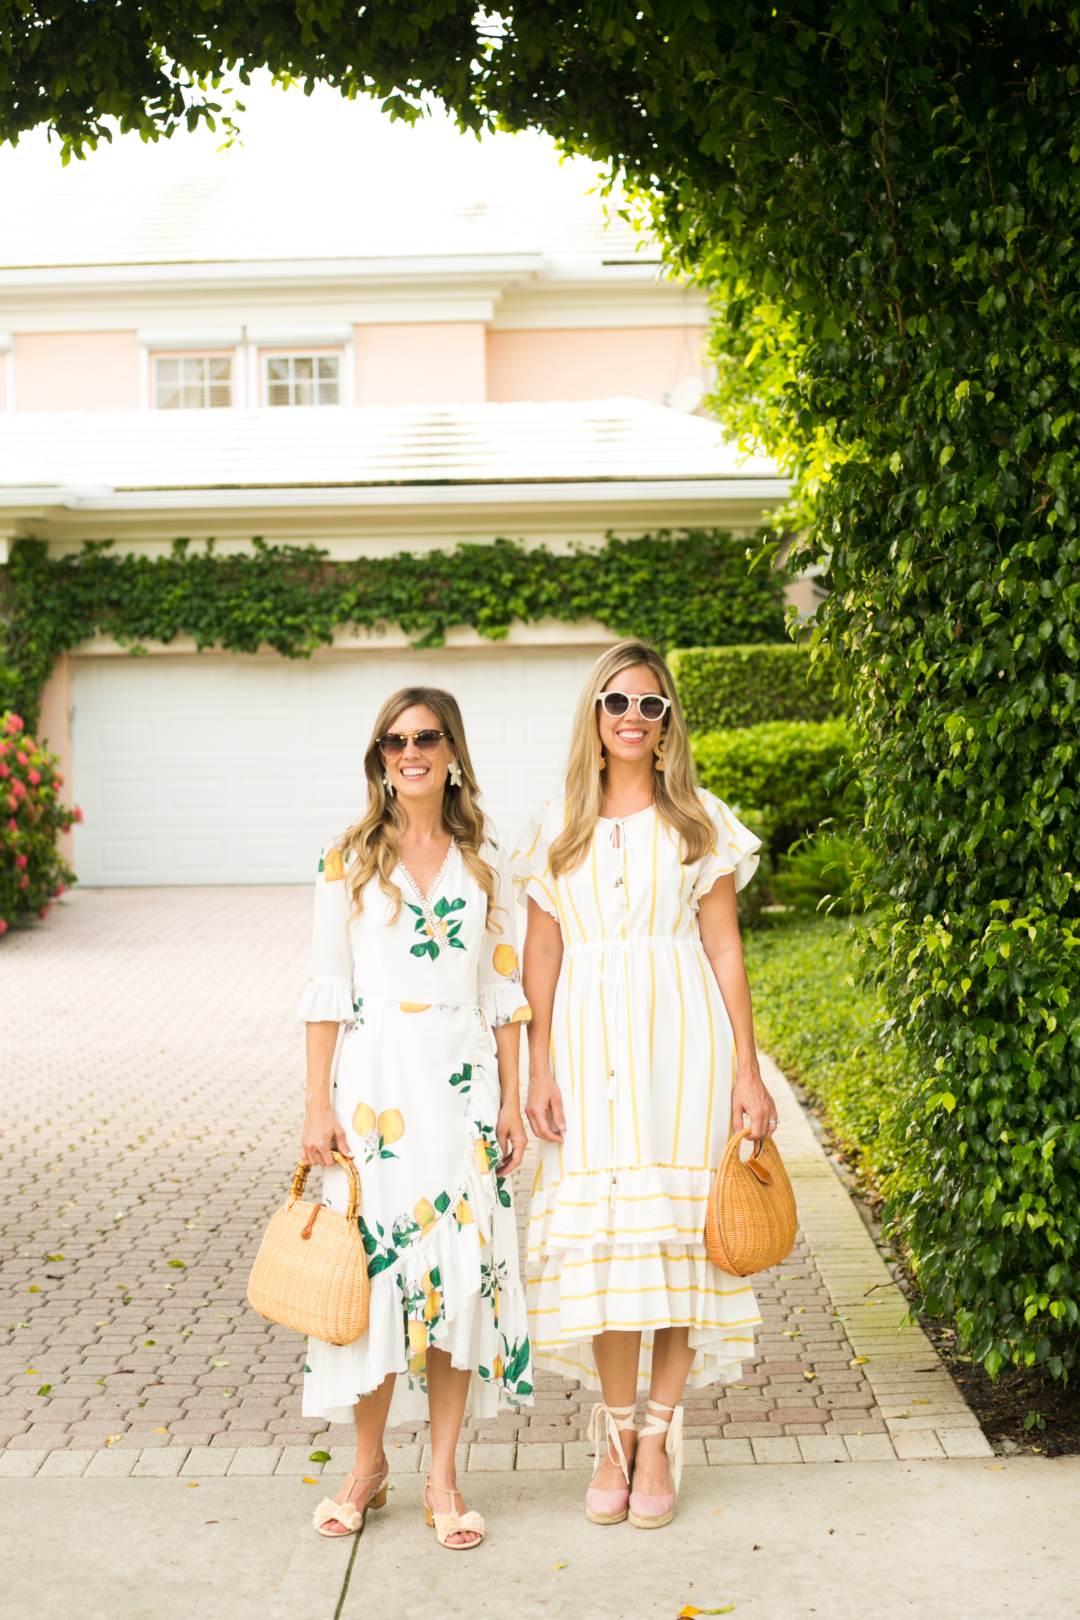 Fashion: Lemons and Stripes with Palm Beach Lately